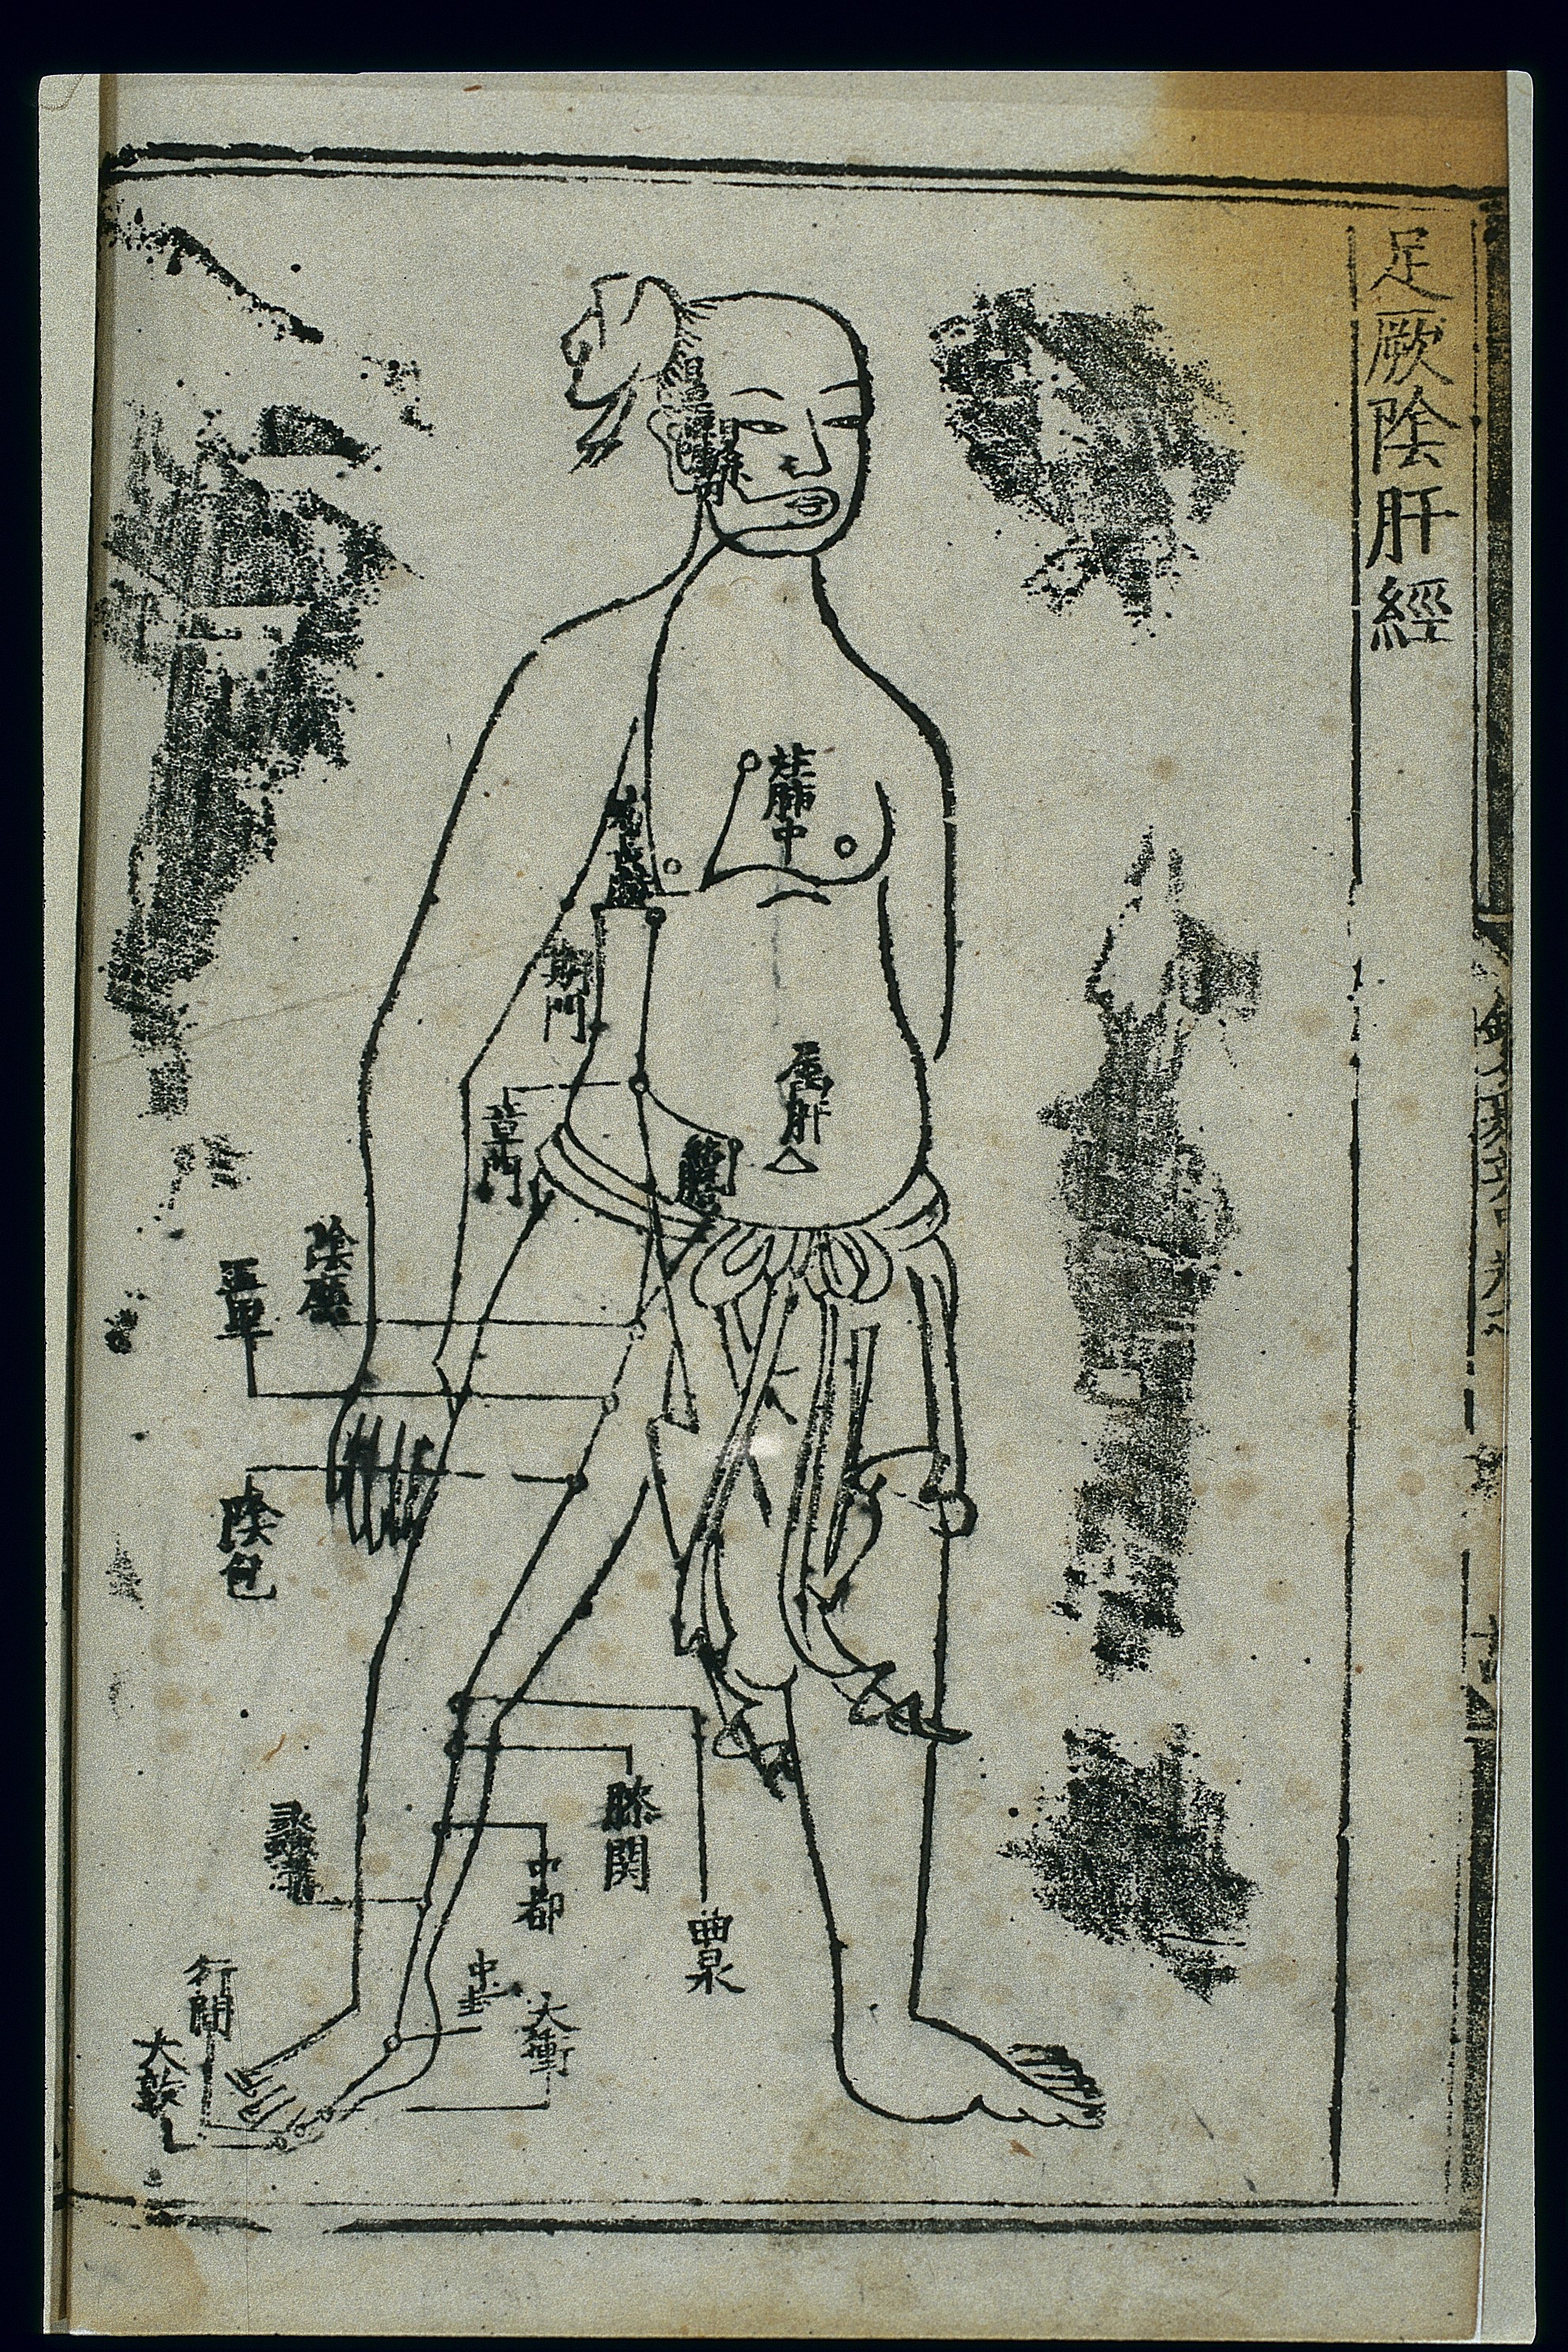 Foot Acupuncture Chart